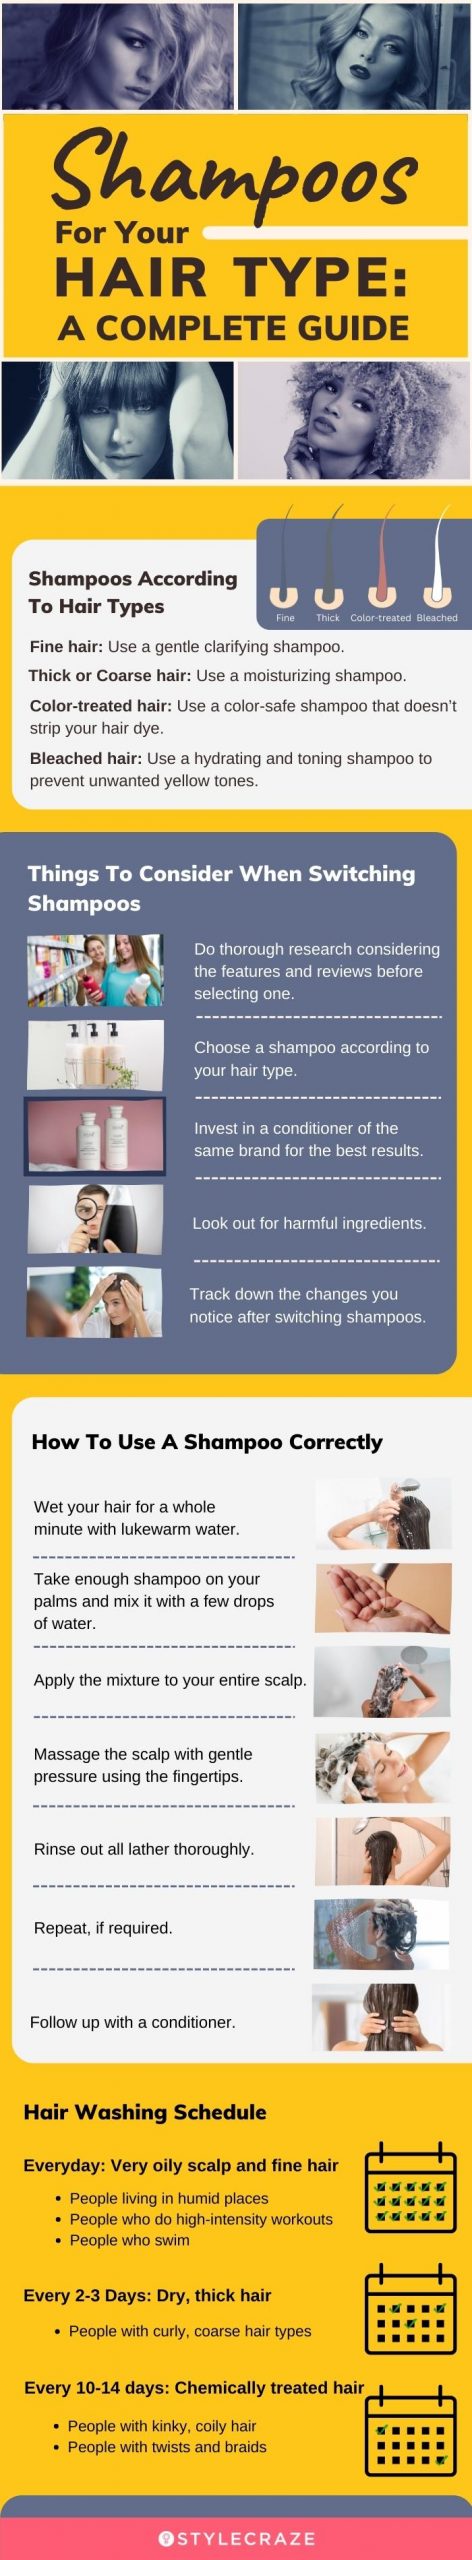 Shampoos For Your Hair Type (infographic)